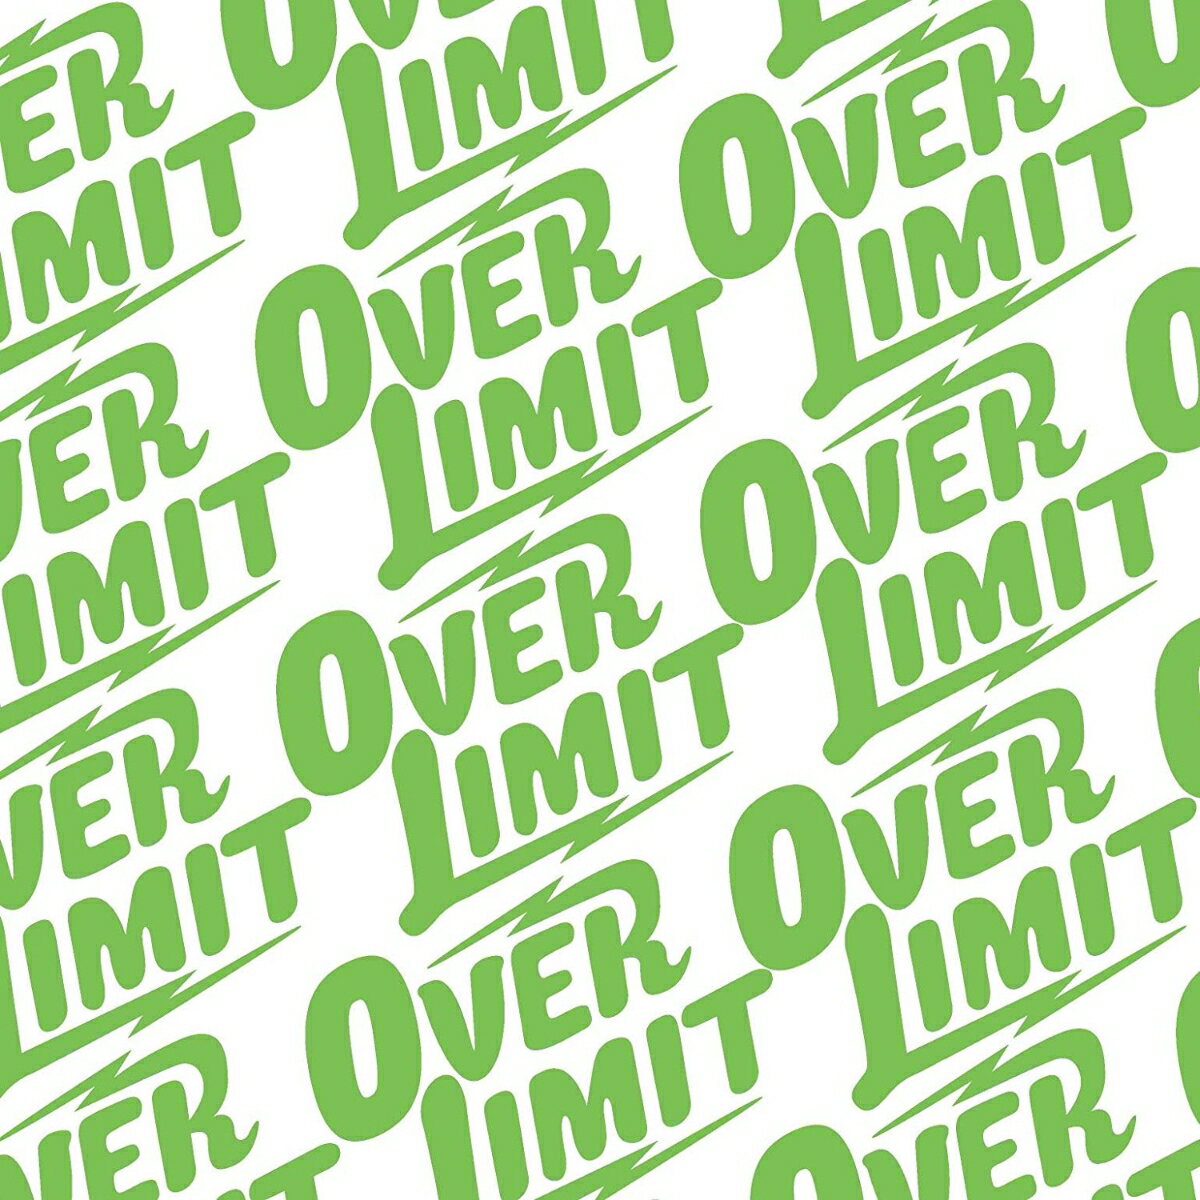 THE BEST [ OVER LIMIT ]